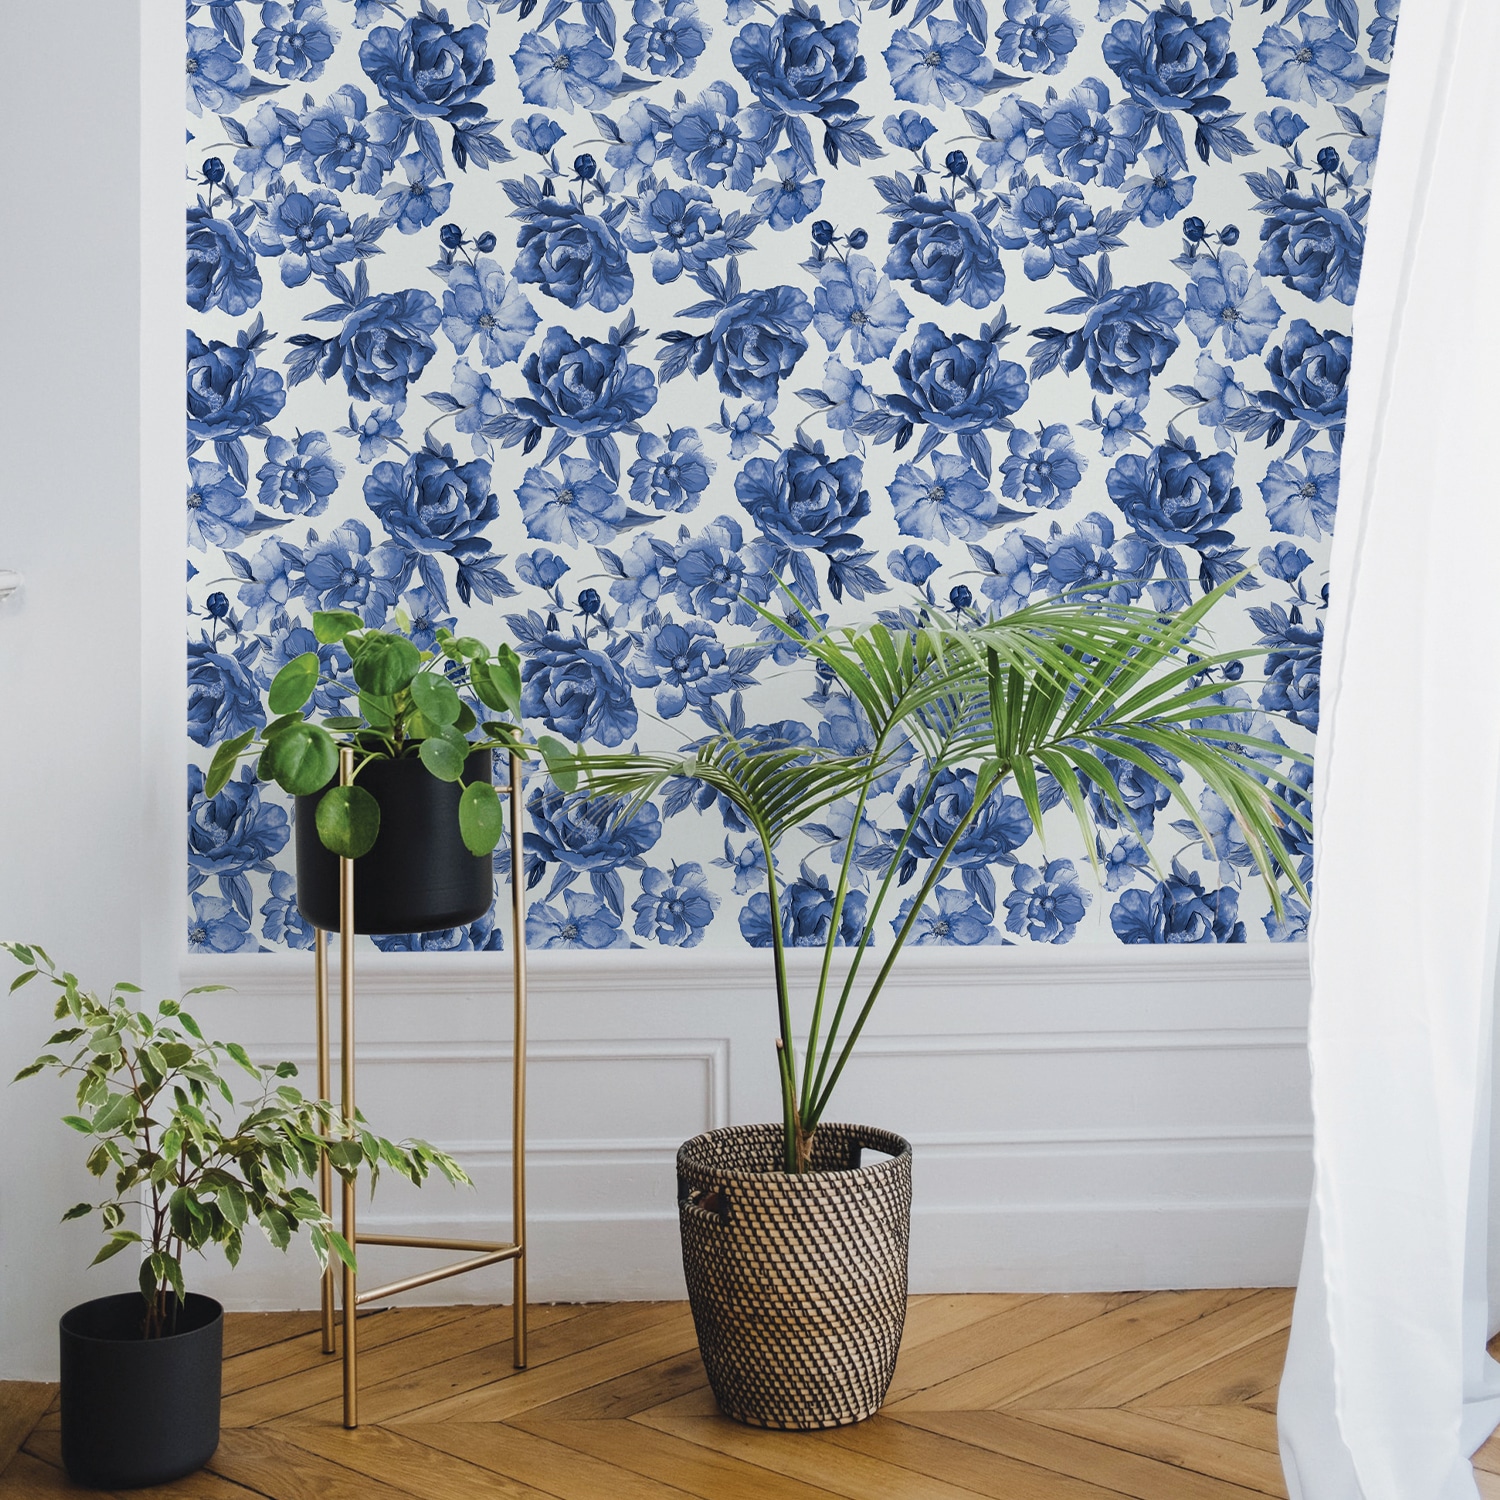 VBS4027  Blue Toile Foliage Peel and Stick Wallpaper  by Vera Bradley  NuWallpaper